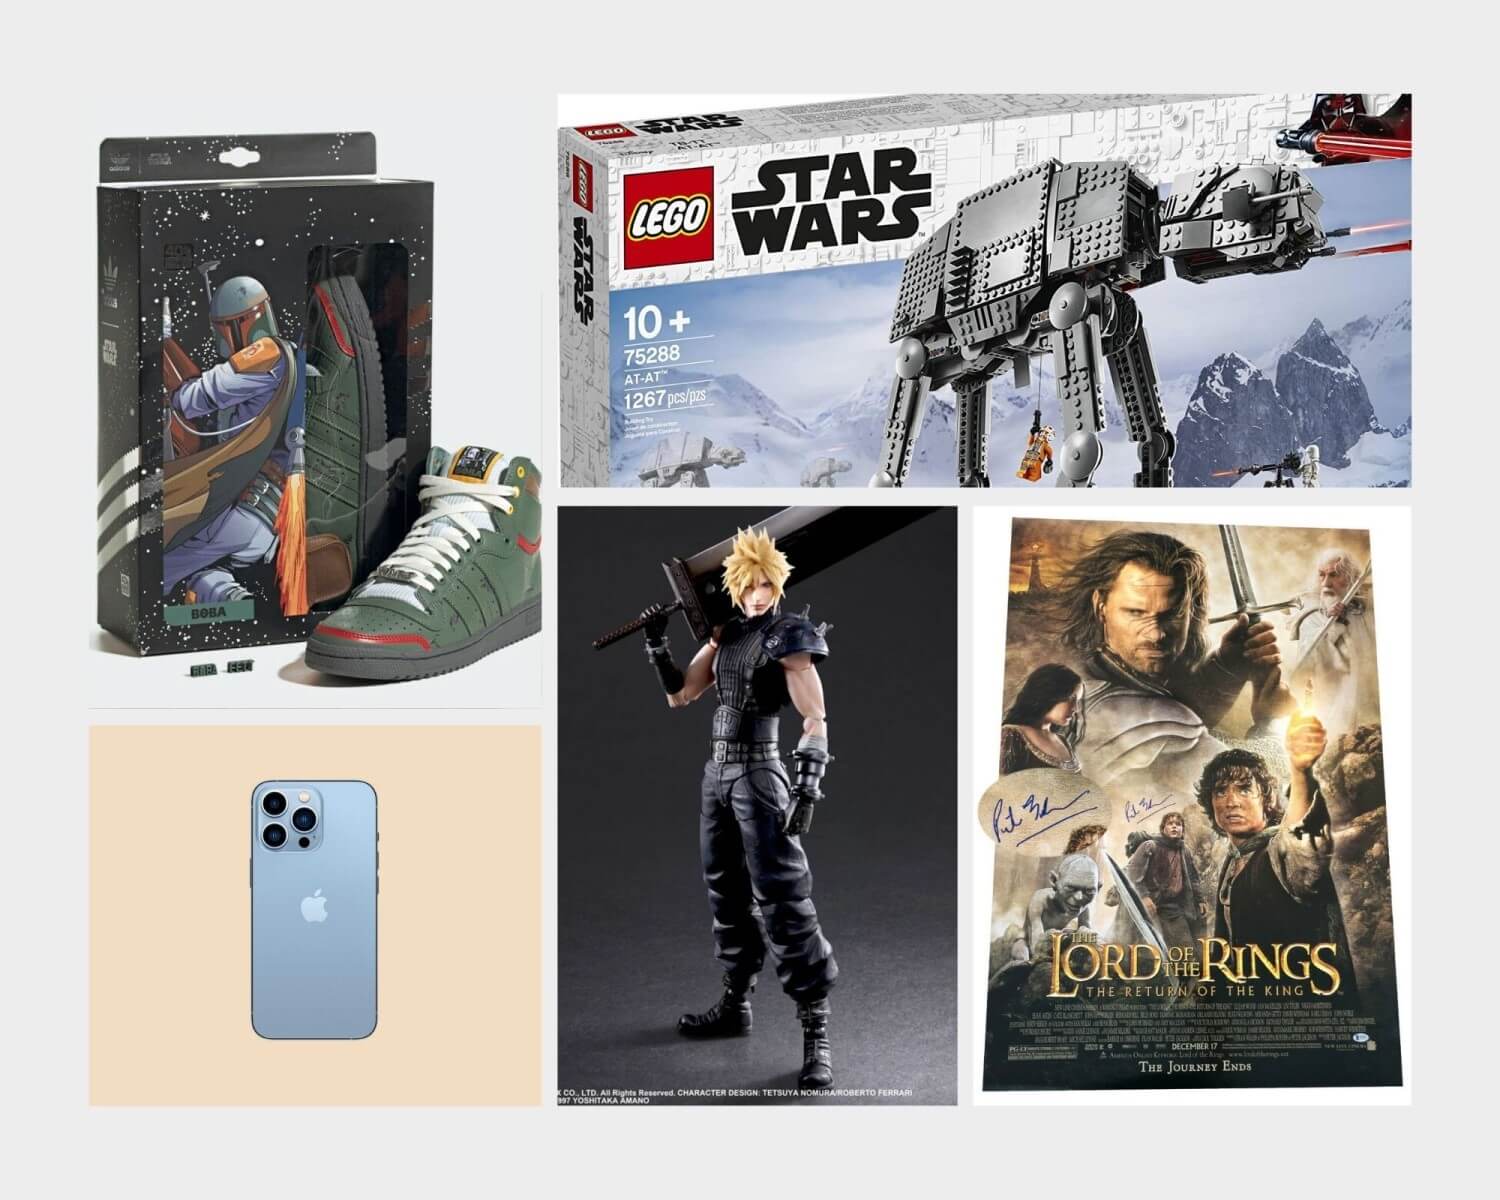 A collage of prizes you could win, including an iPhone and Mandalorian sneakers